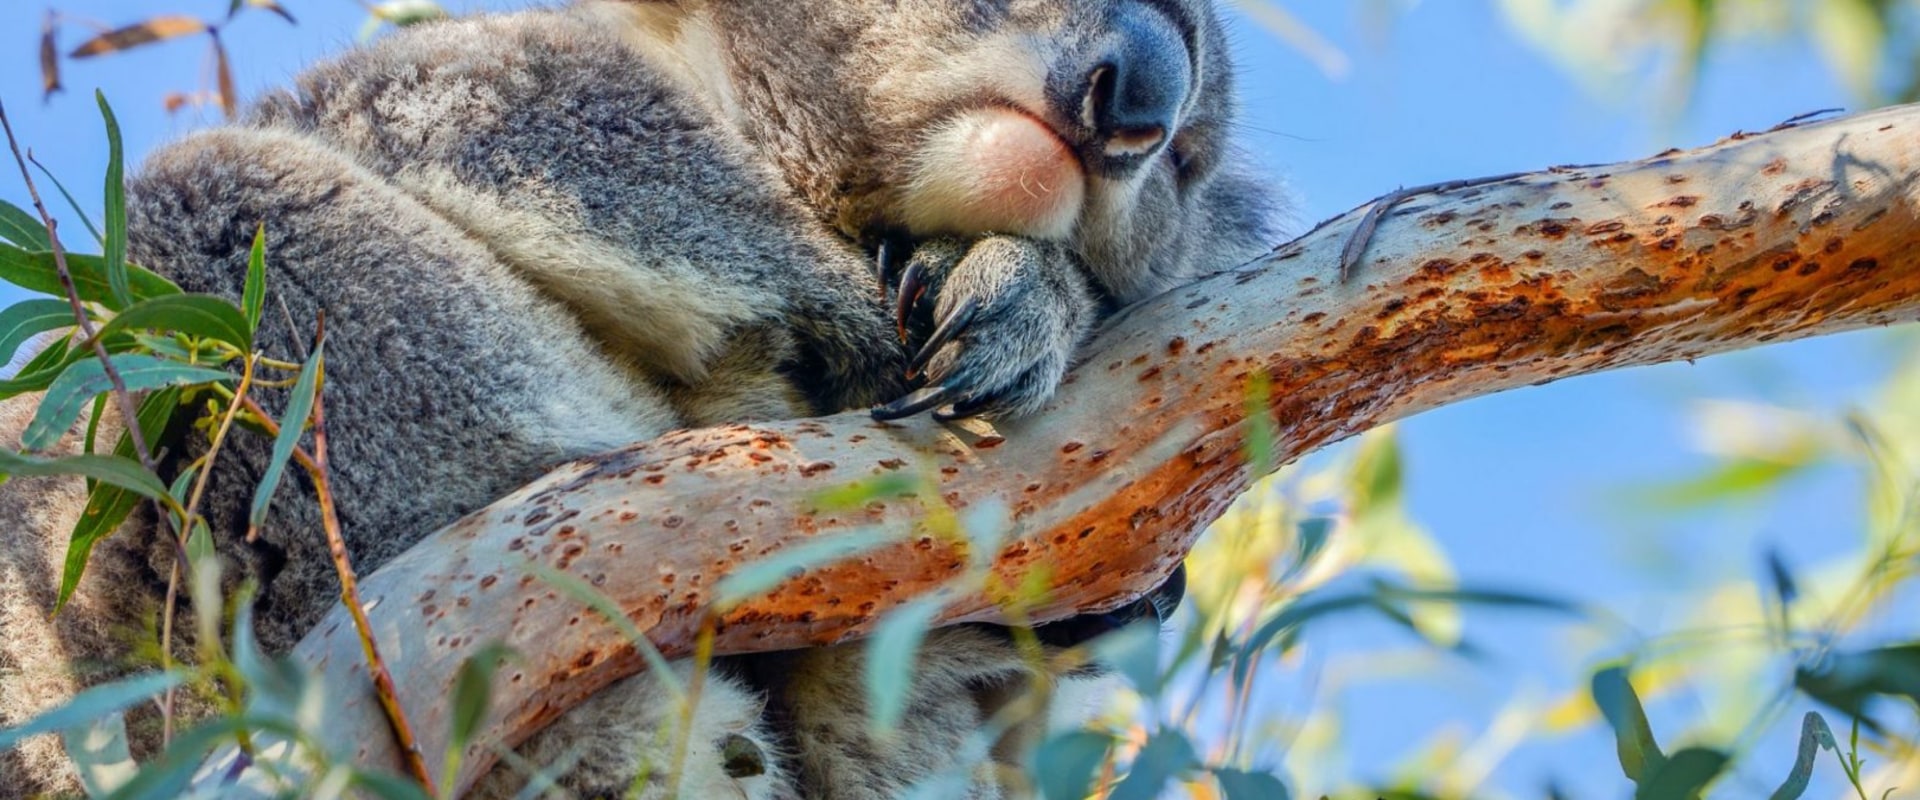 Koala Hospital in Port Macquarie: A Fascinating Look at Australia's Conservation Efforts